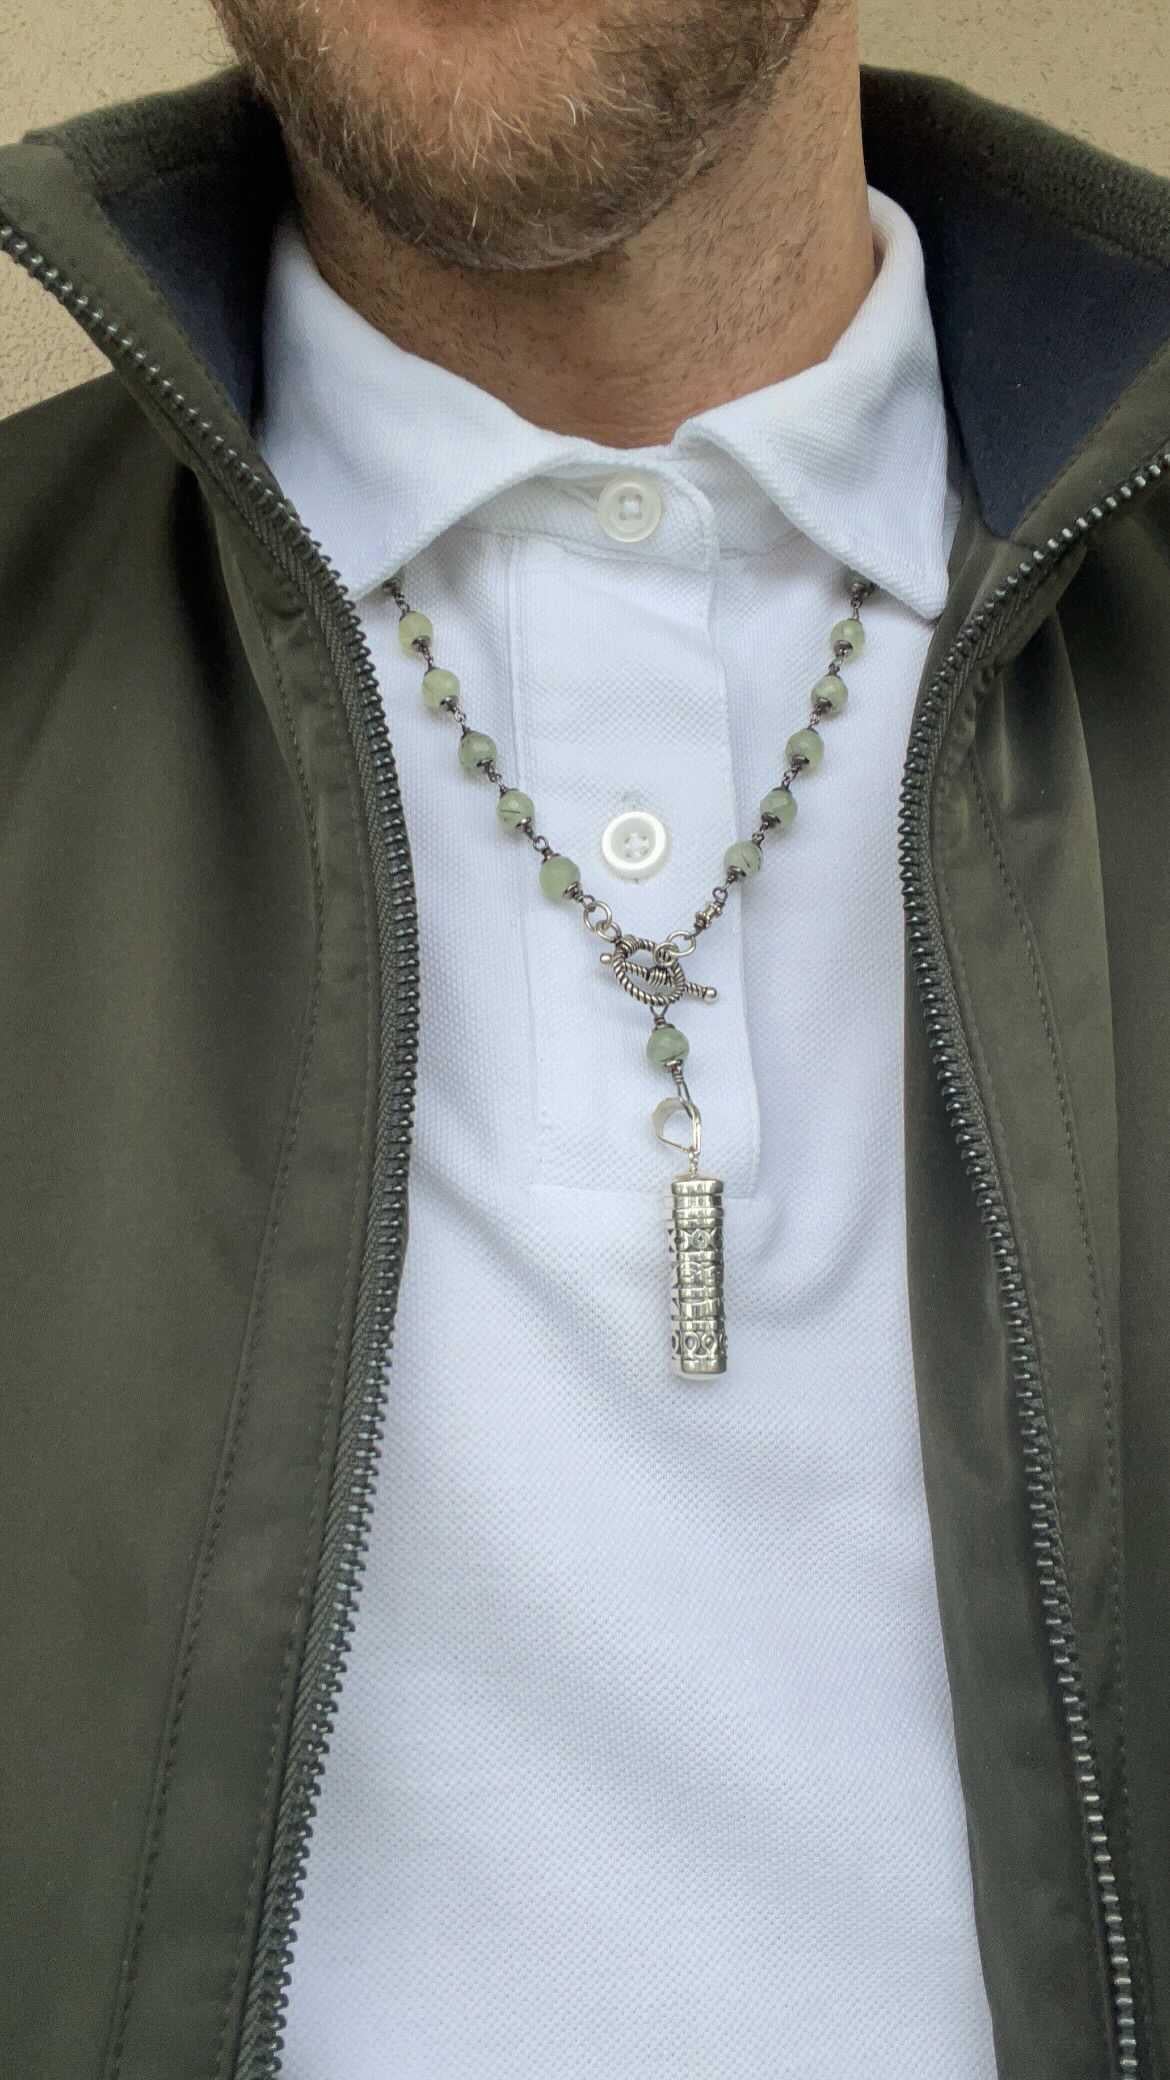 Story Behind the Jewelry
A unique and intriguing gemstone, Prehnite adds a fresh green glow to any piece of jewelry. The necklace is adorned with an authentic ornate silver locket pendant that can hold anything from a prayer to intentions or even a